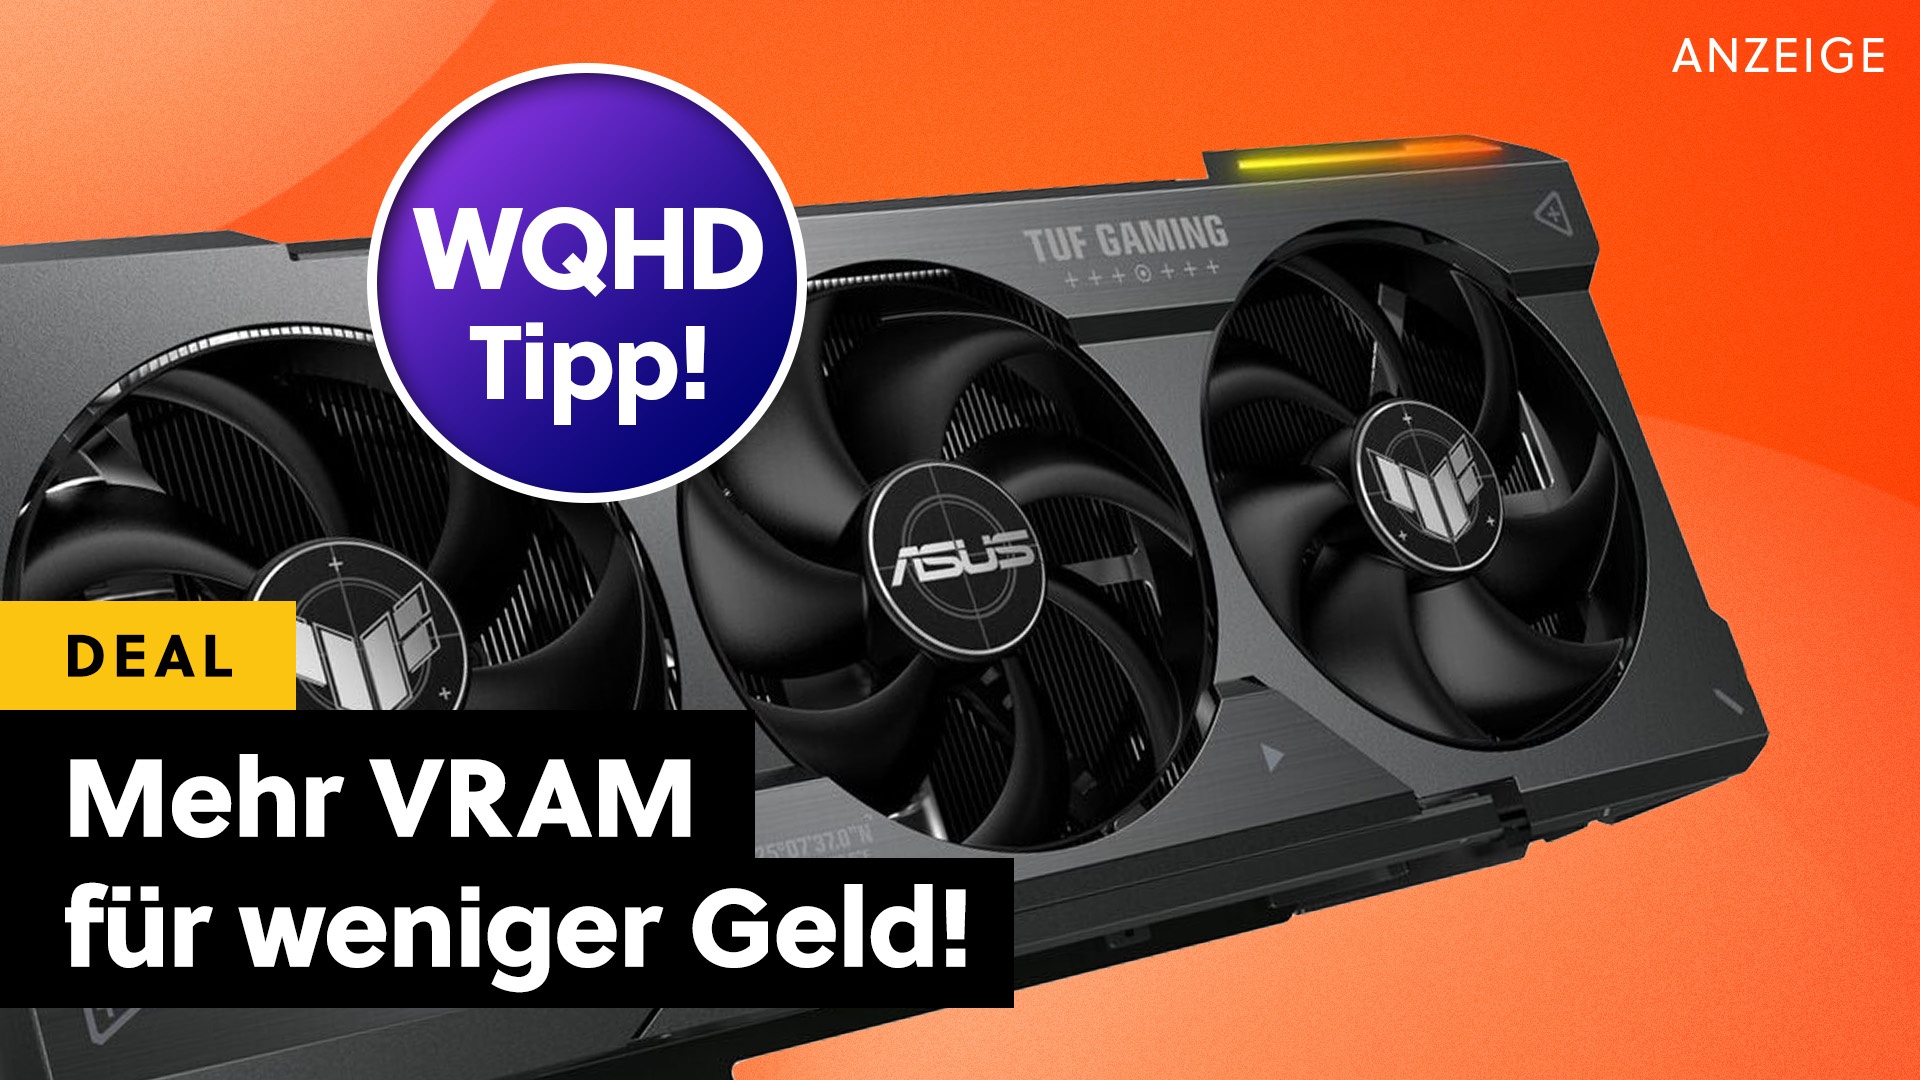 My graphics card recommendation for WQHD gaming is much cheaper on Amazon for a while!